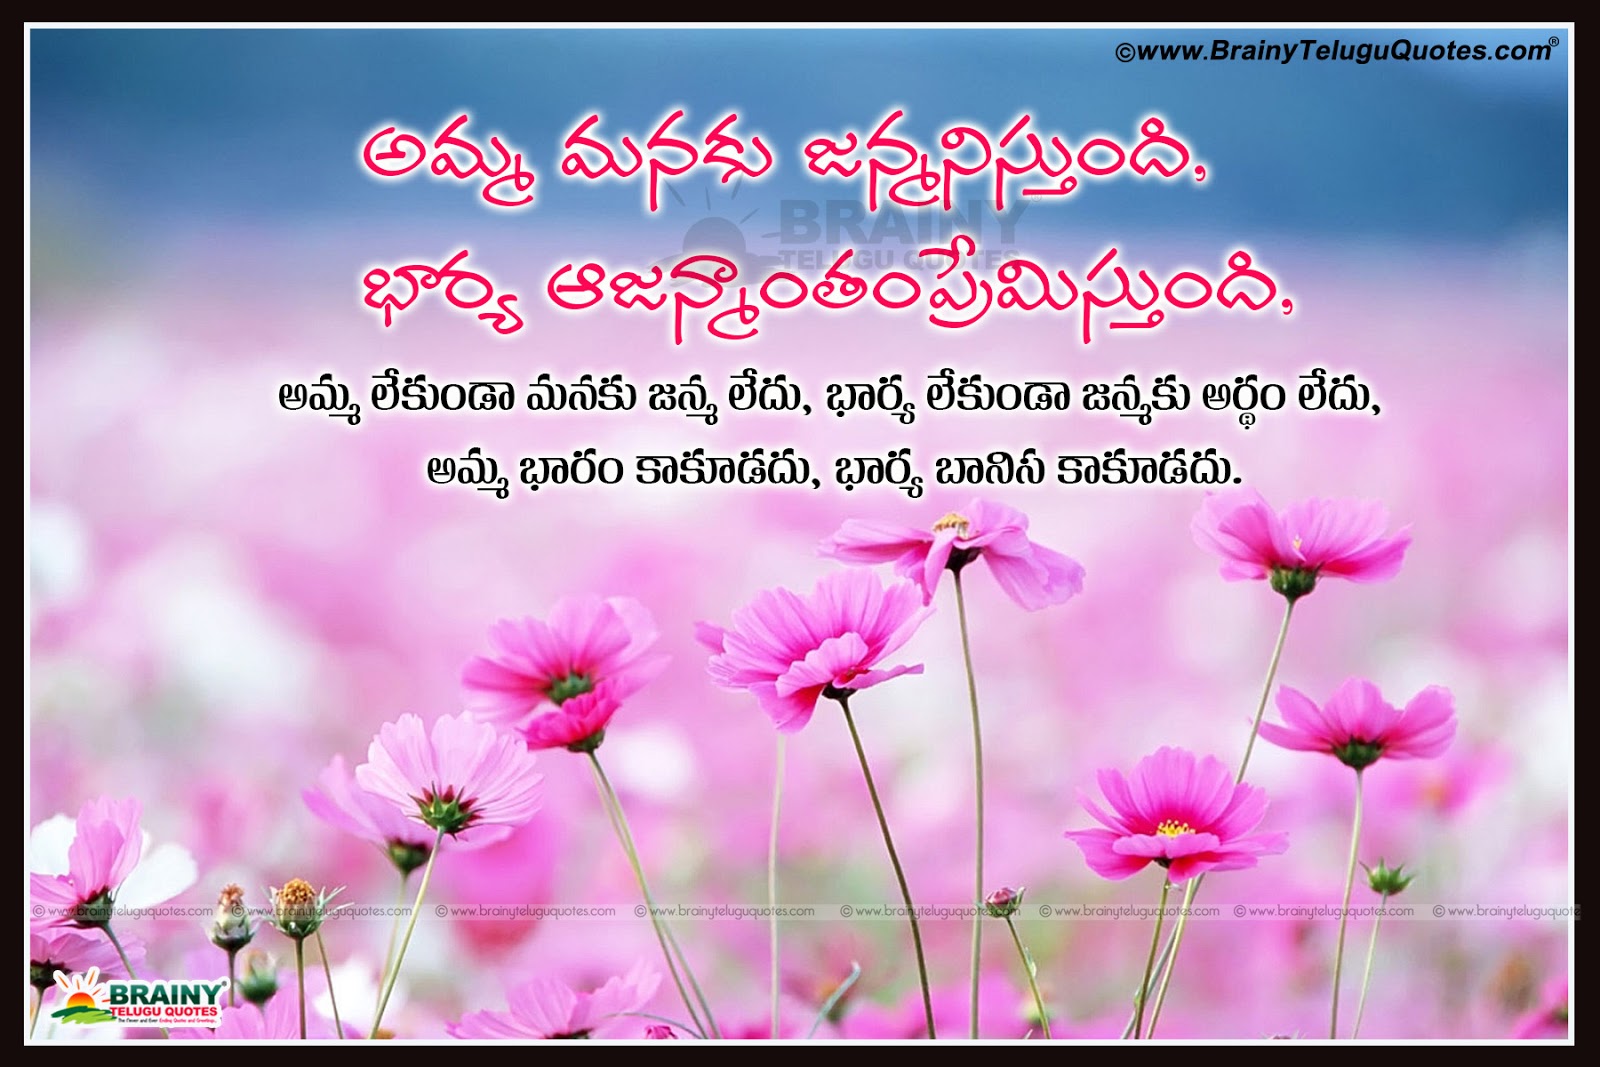 Mother Wife and Husband Relationship Quotes in Telugu ...